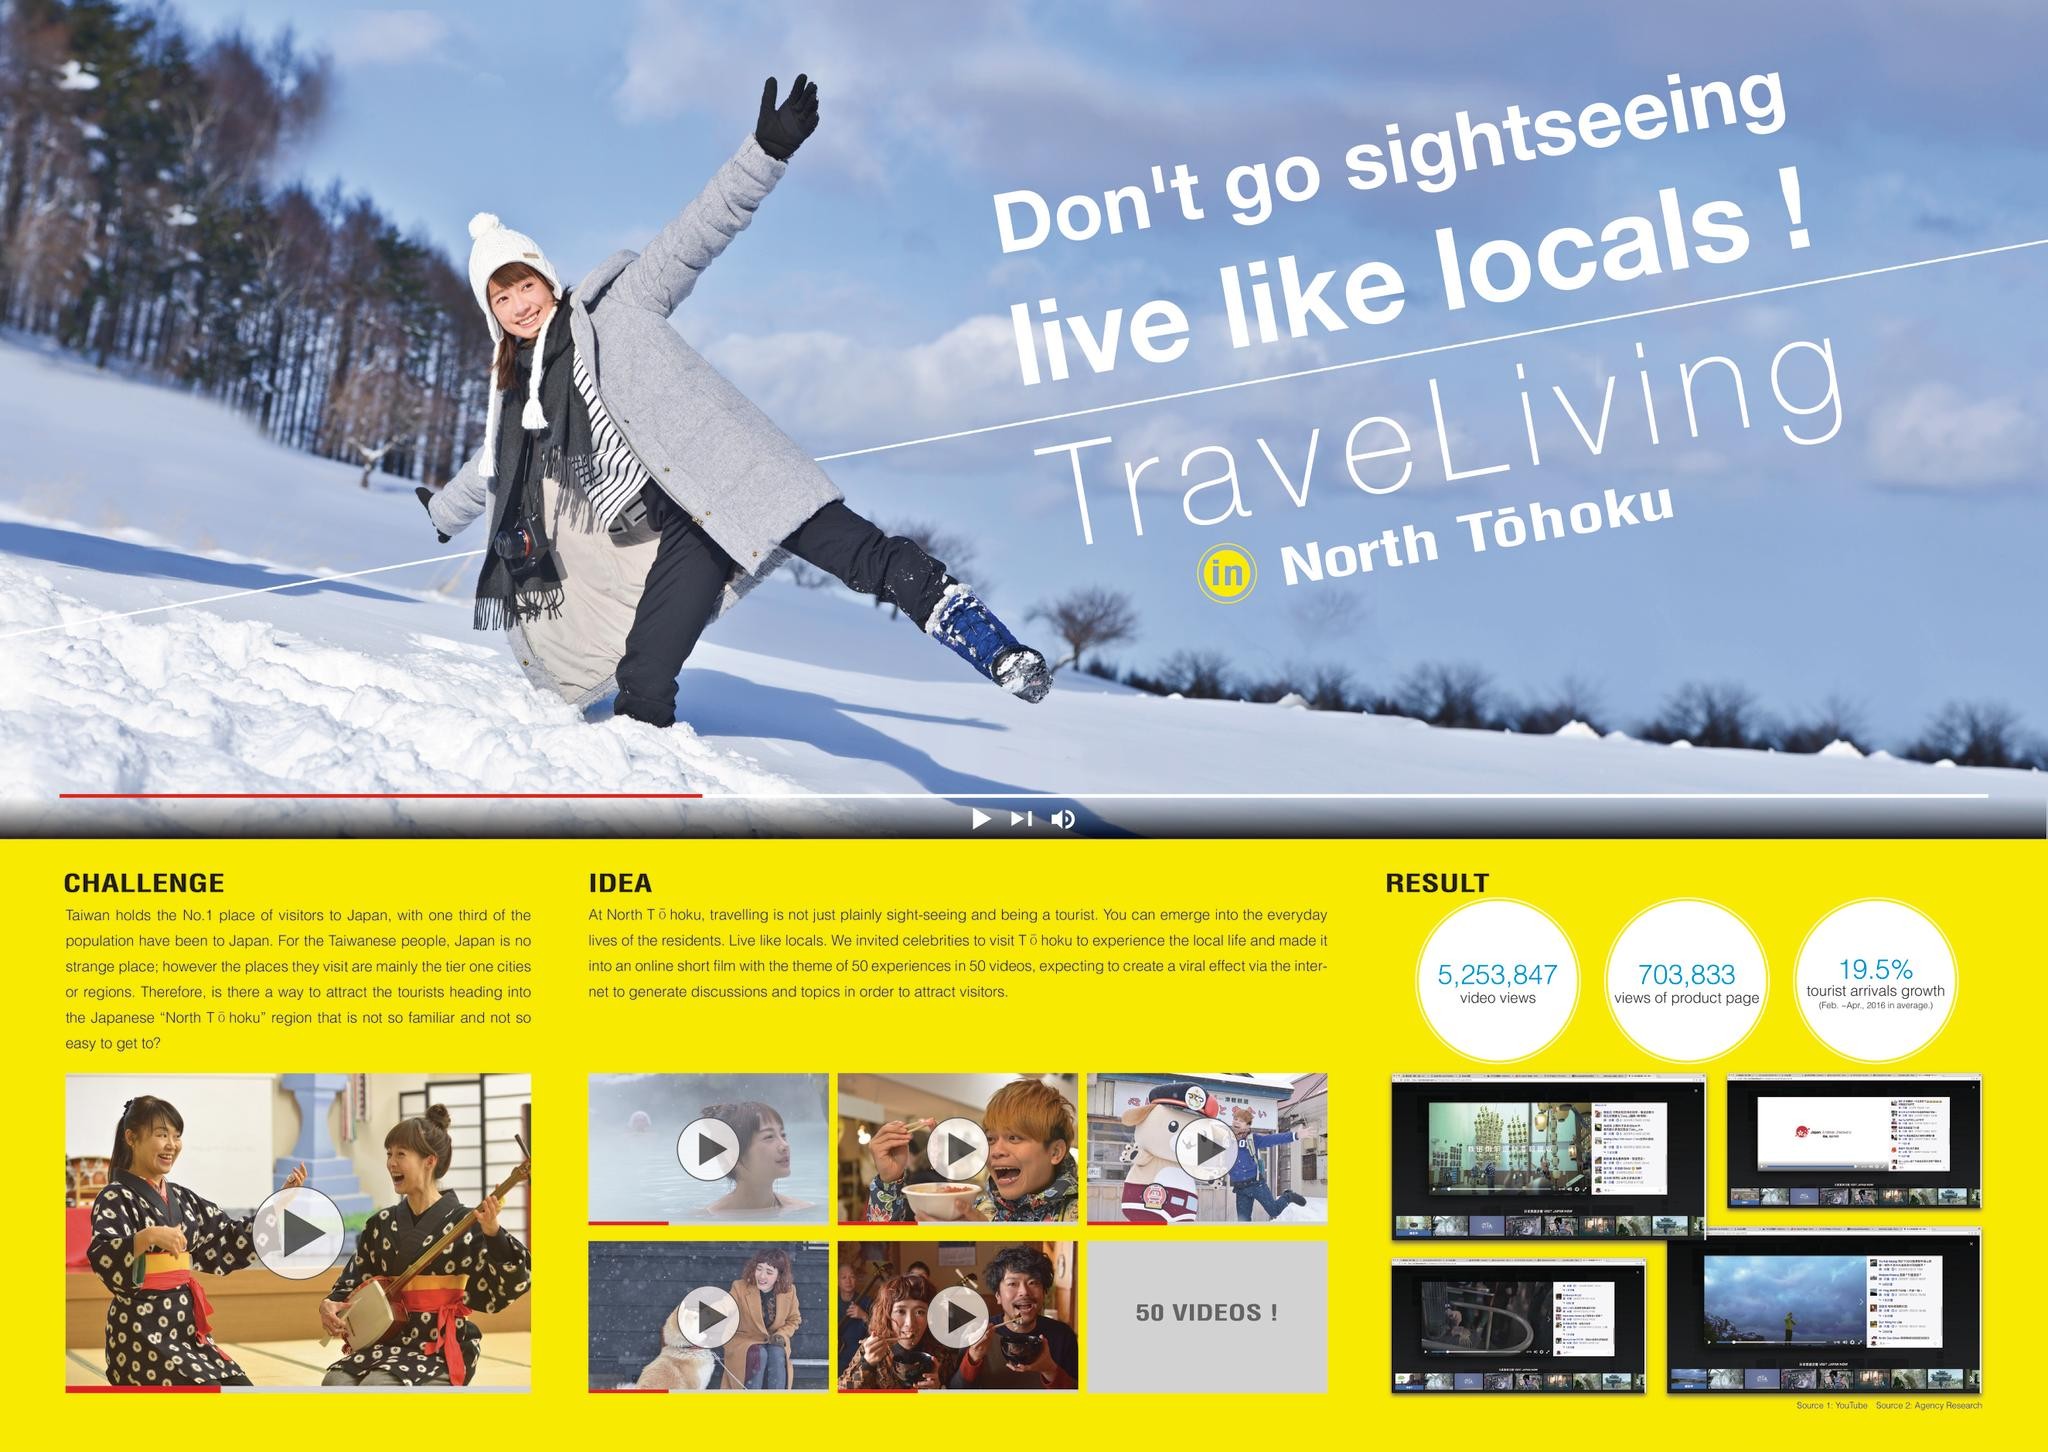 TRAVELIVING IN NORTH TOHOKU